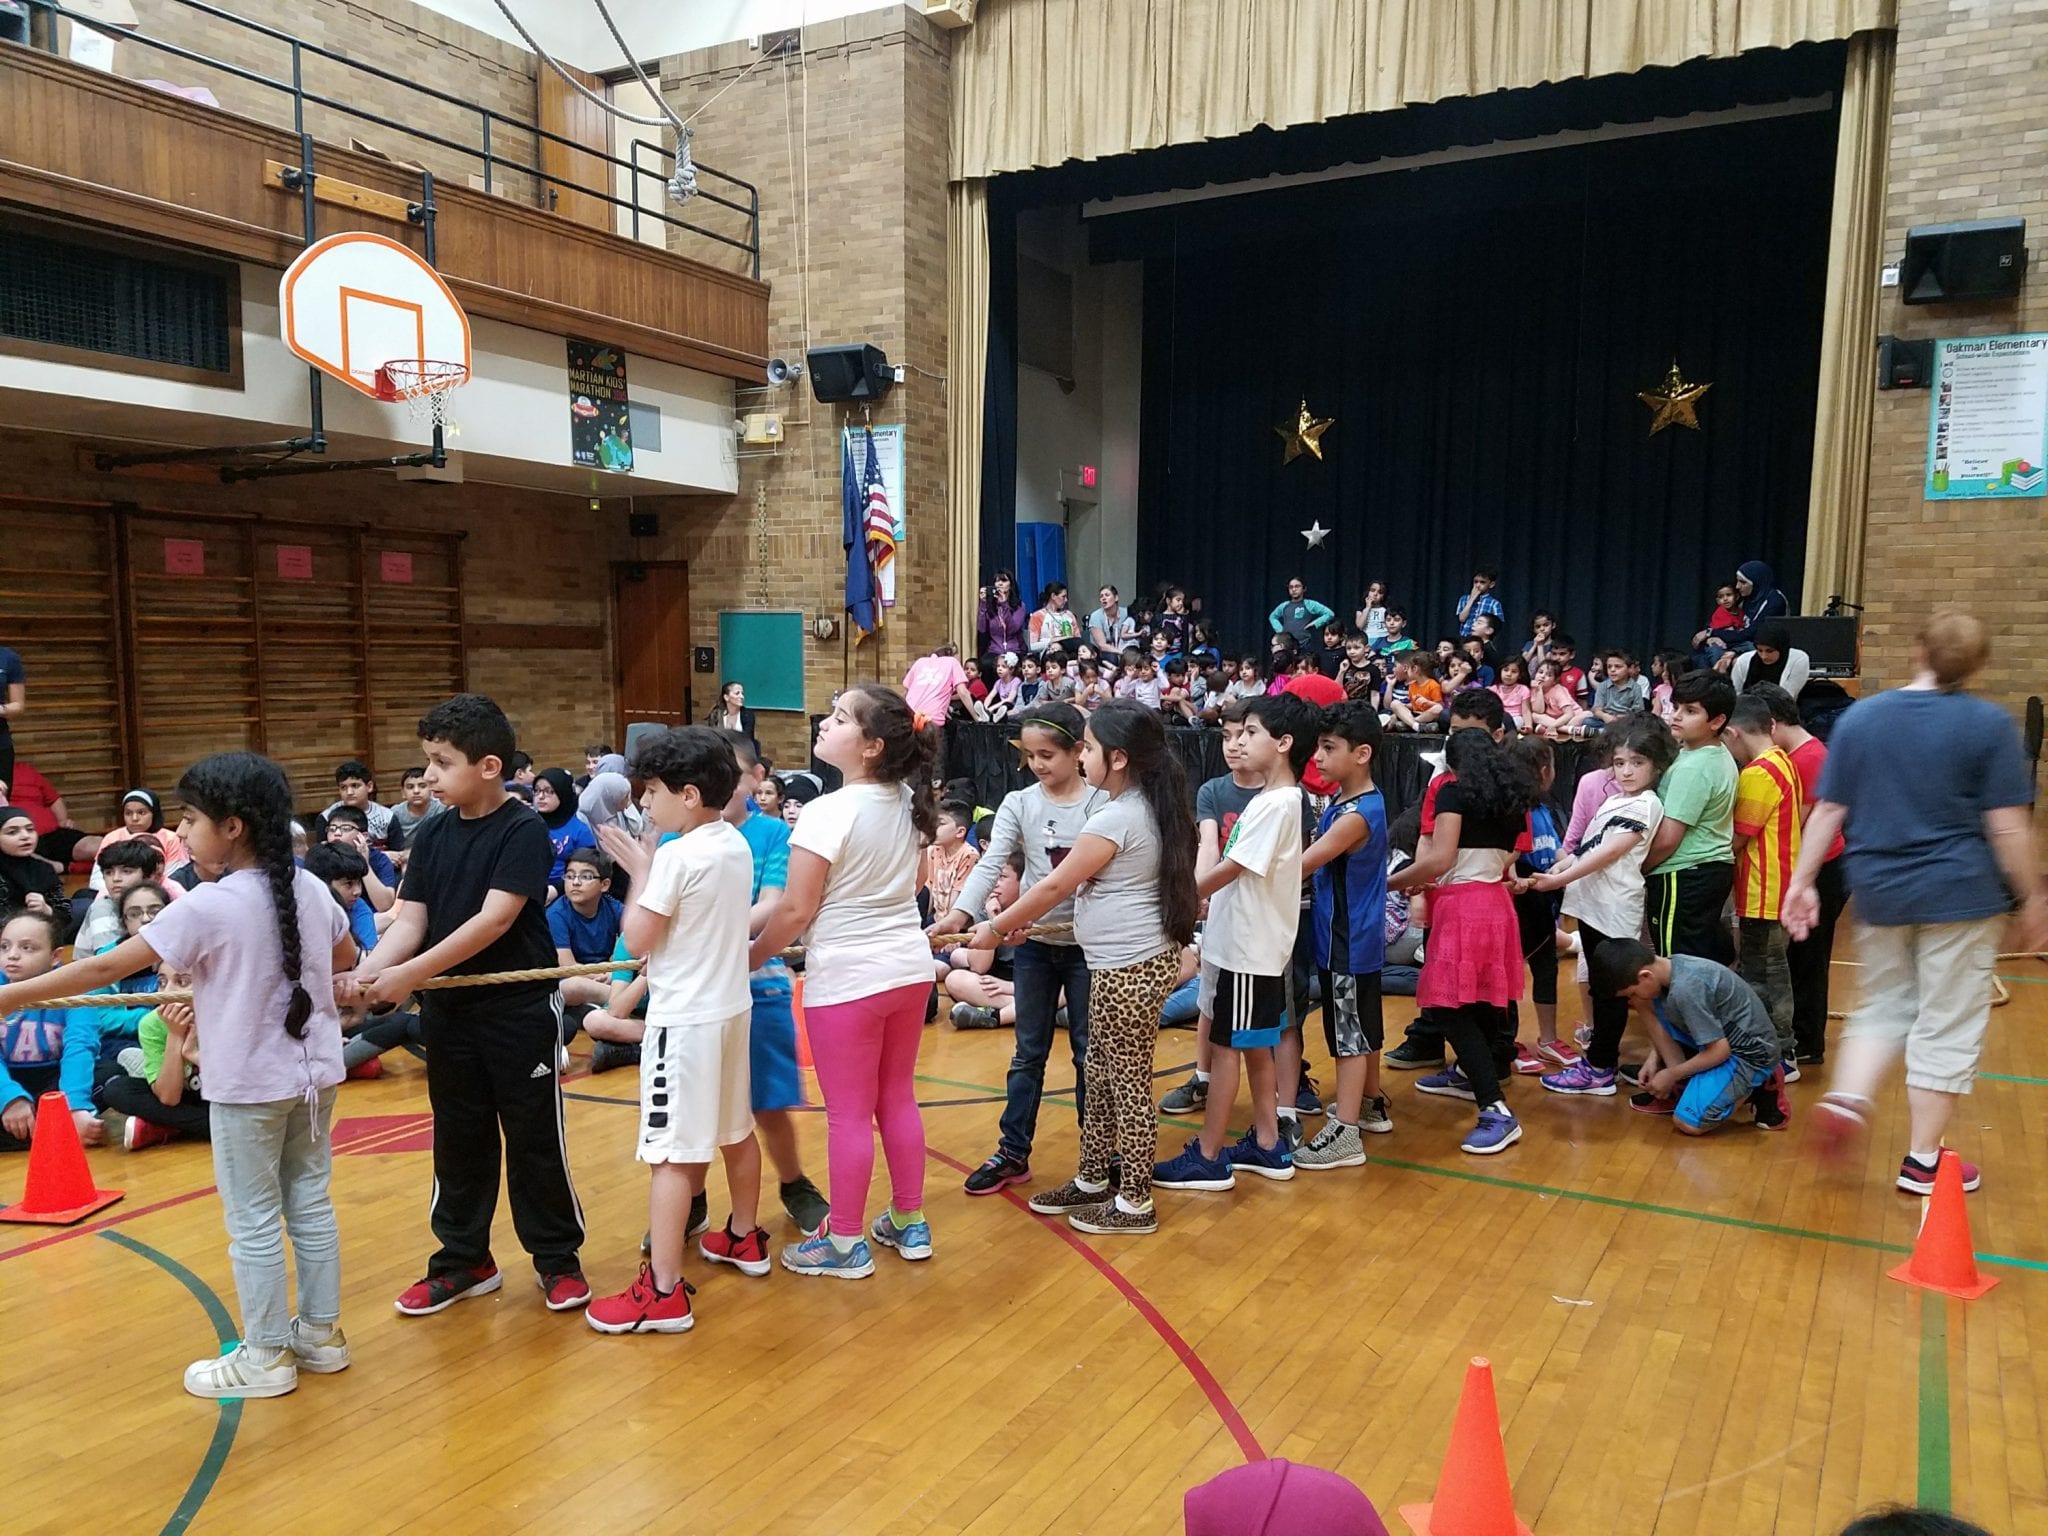 2nd graders getting ready for Tug of War